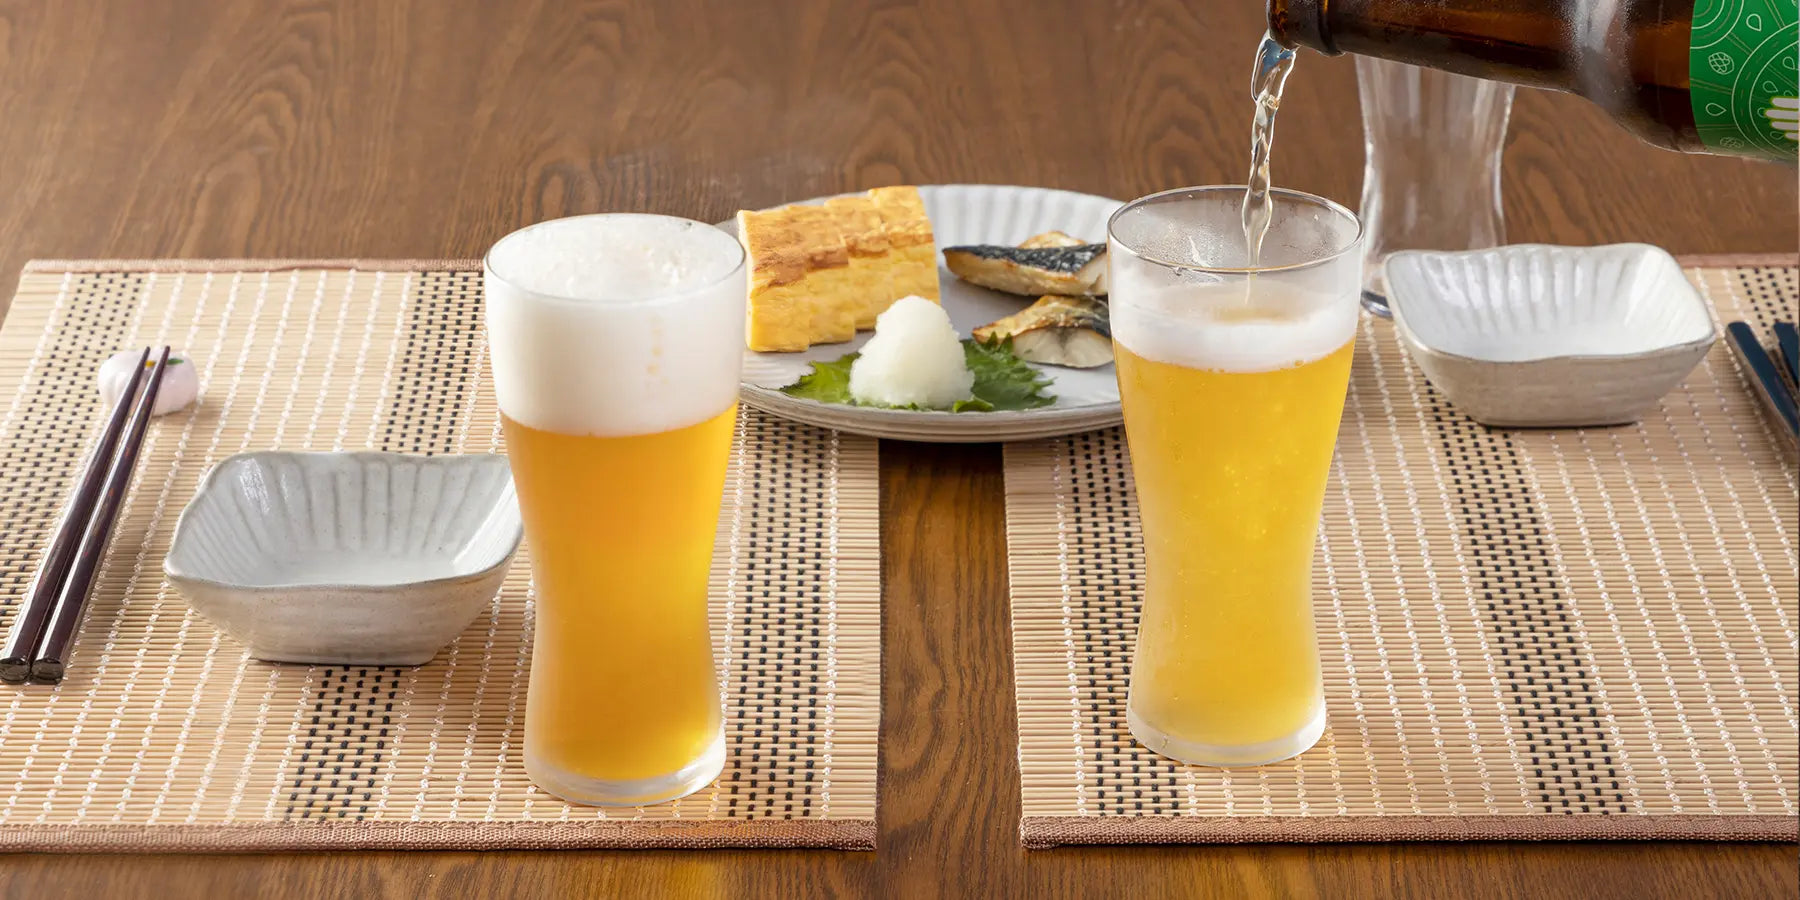 Discover our great selection of Beer Glasses at Globalkitchen Japan.